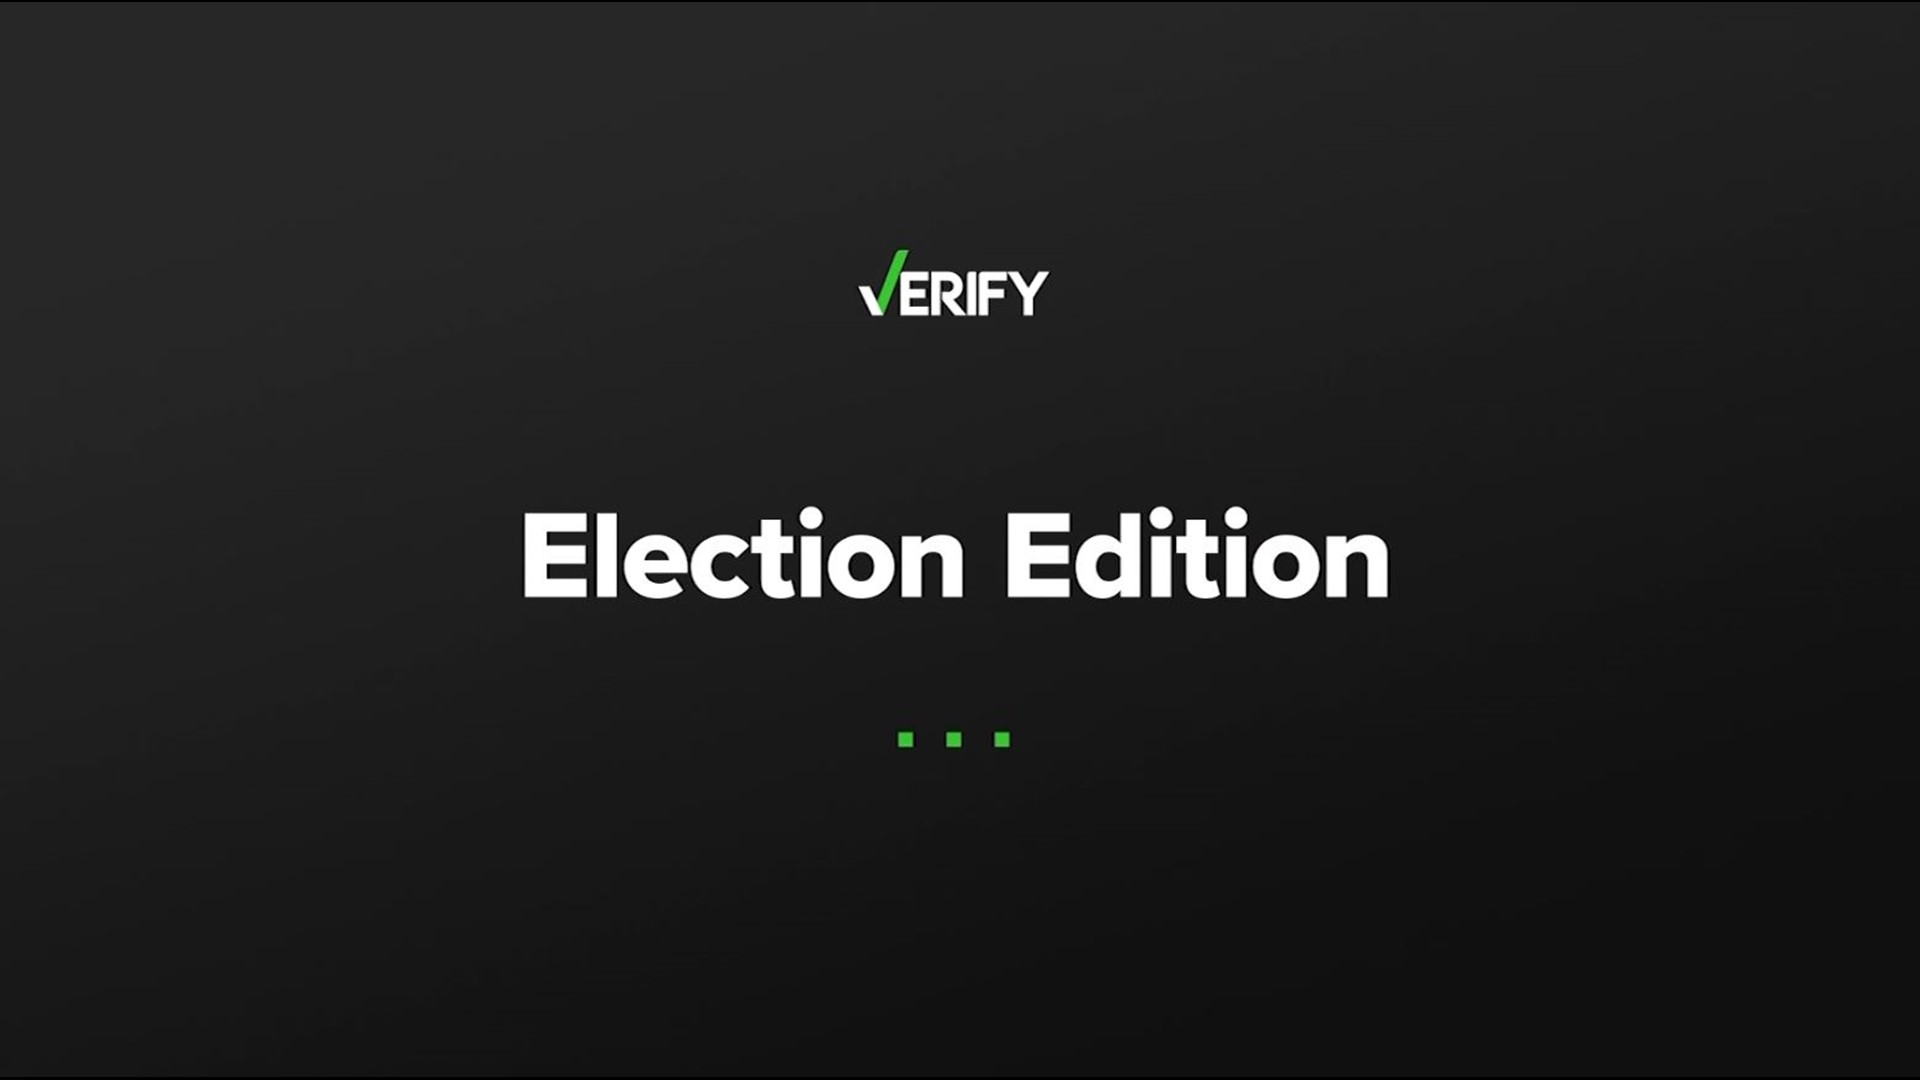 Synopsis: From campaign ads to absentee ballots, the VERIFY team answers your questions on elections and fact checks claims ahead of the 2022 midterm elections.